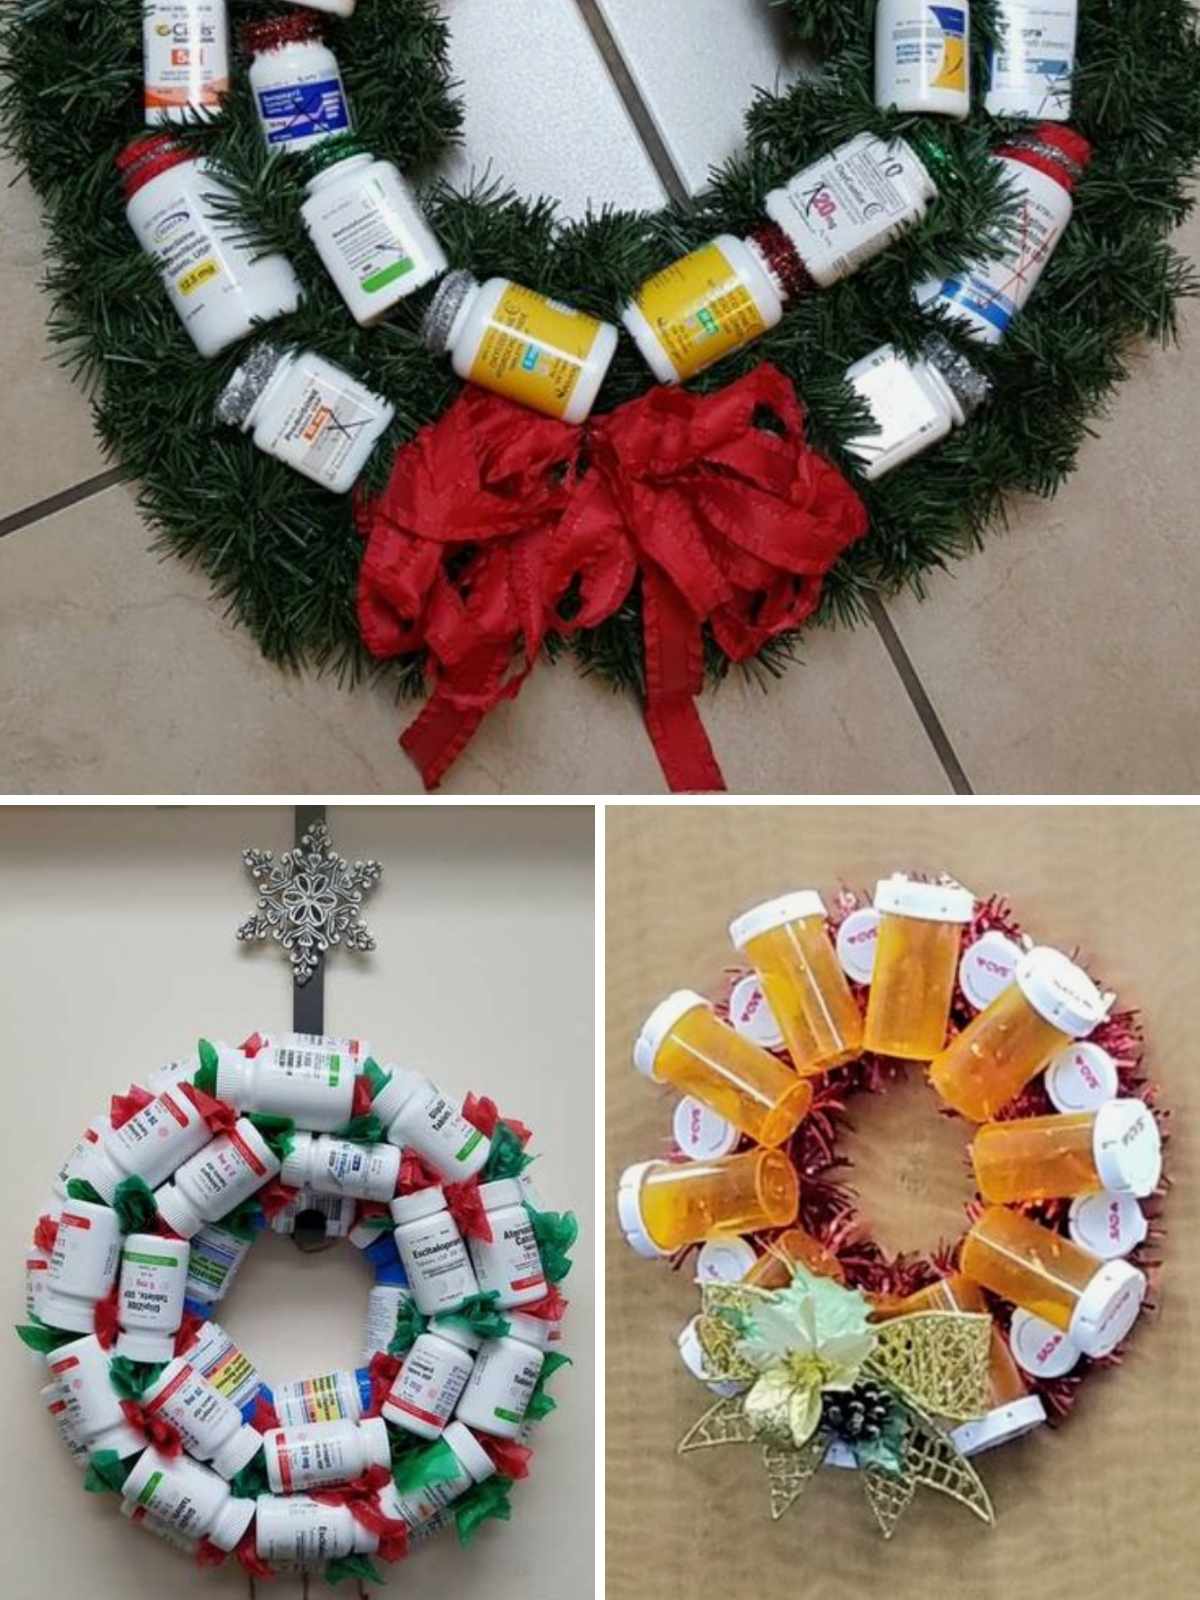 3 Pill bottle wreath examples